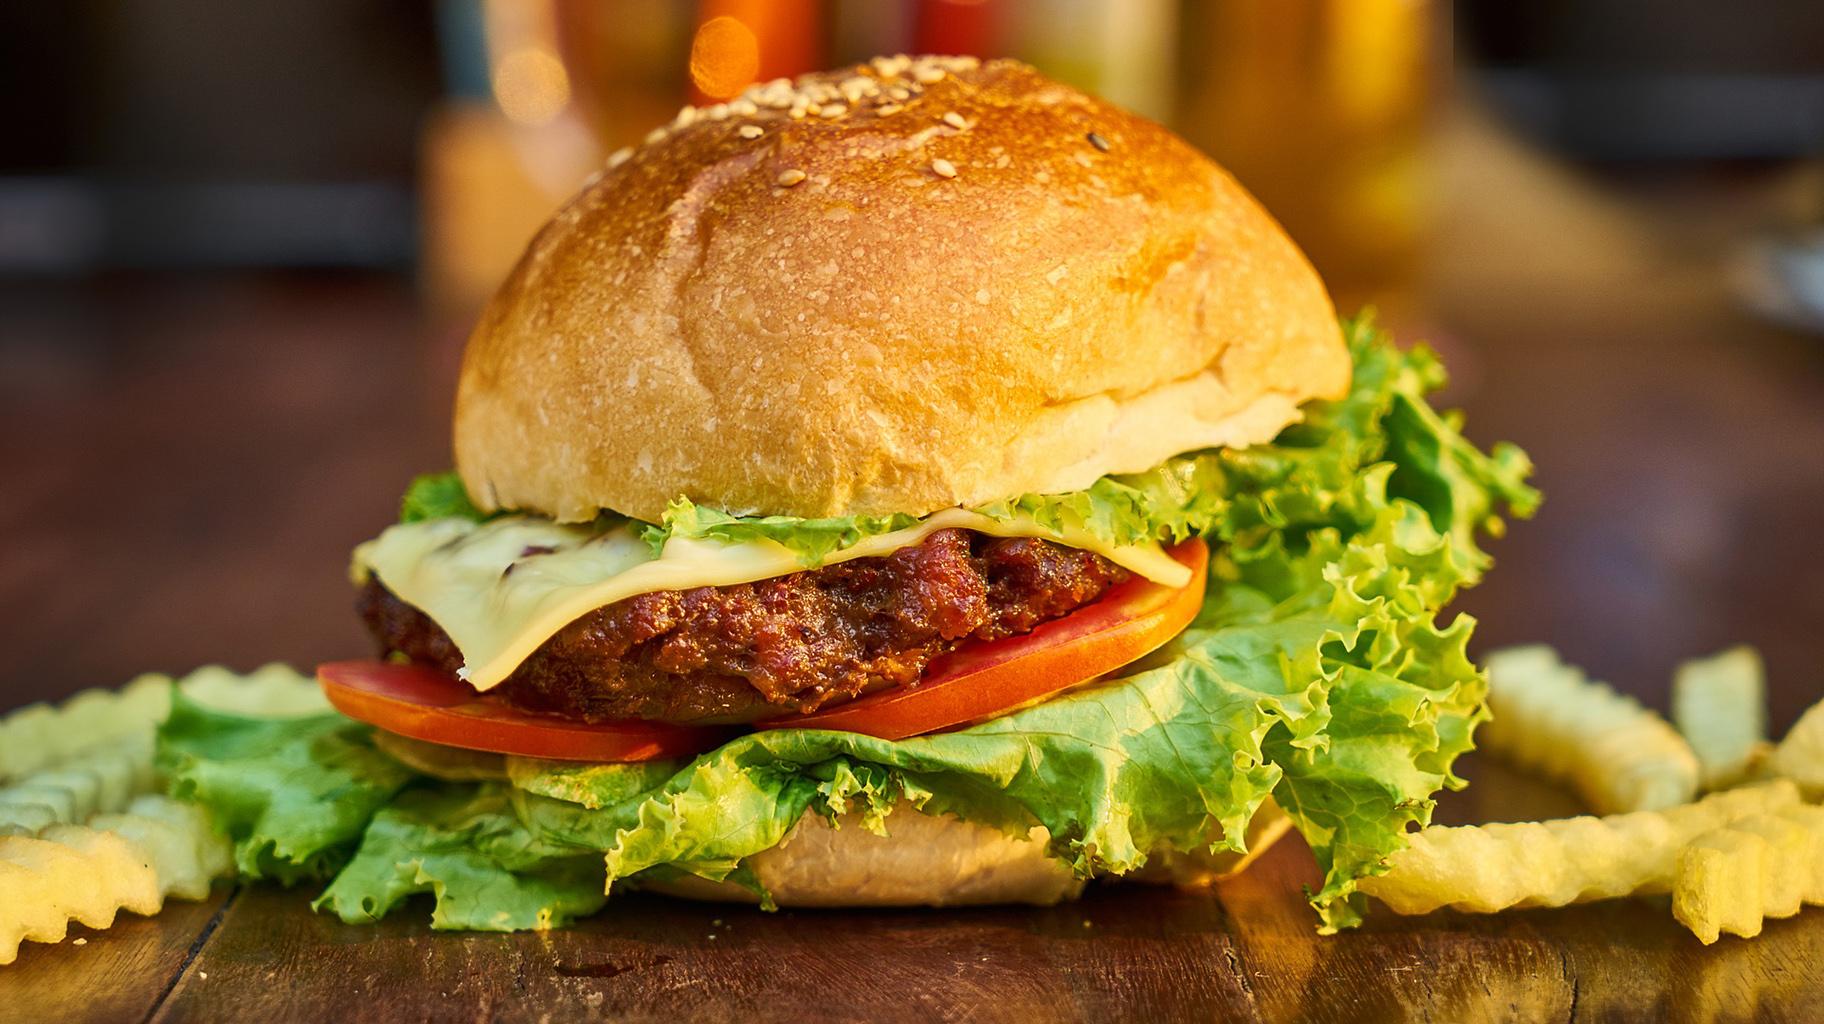 As new products come on the market, traditional beef patties are being challenged by plant-based alternatives. (Engin_Akyurt / Pixabay)